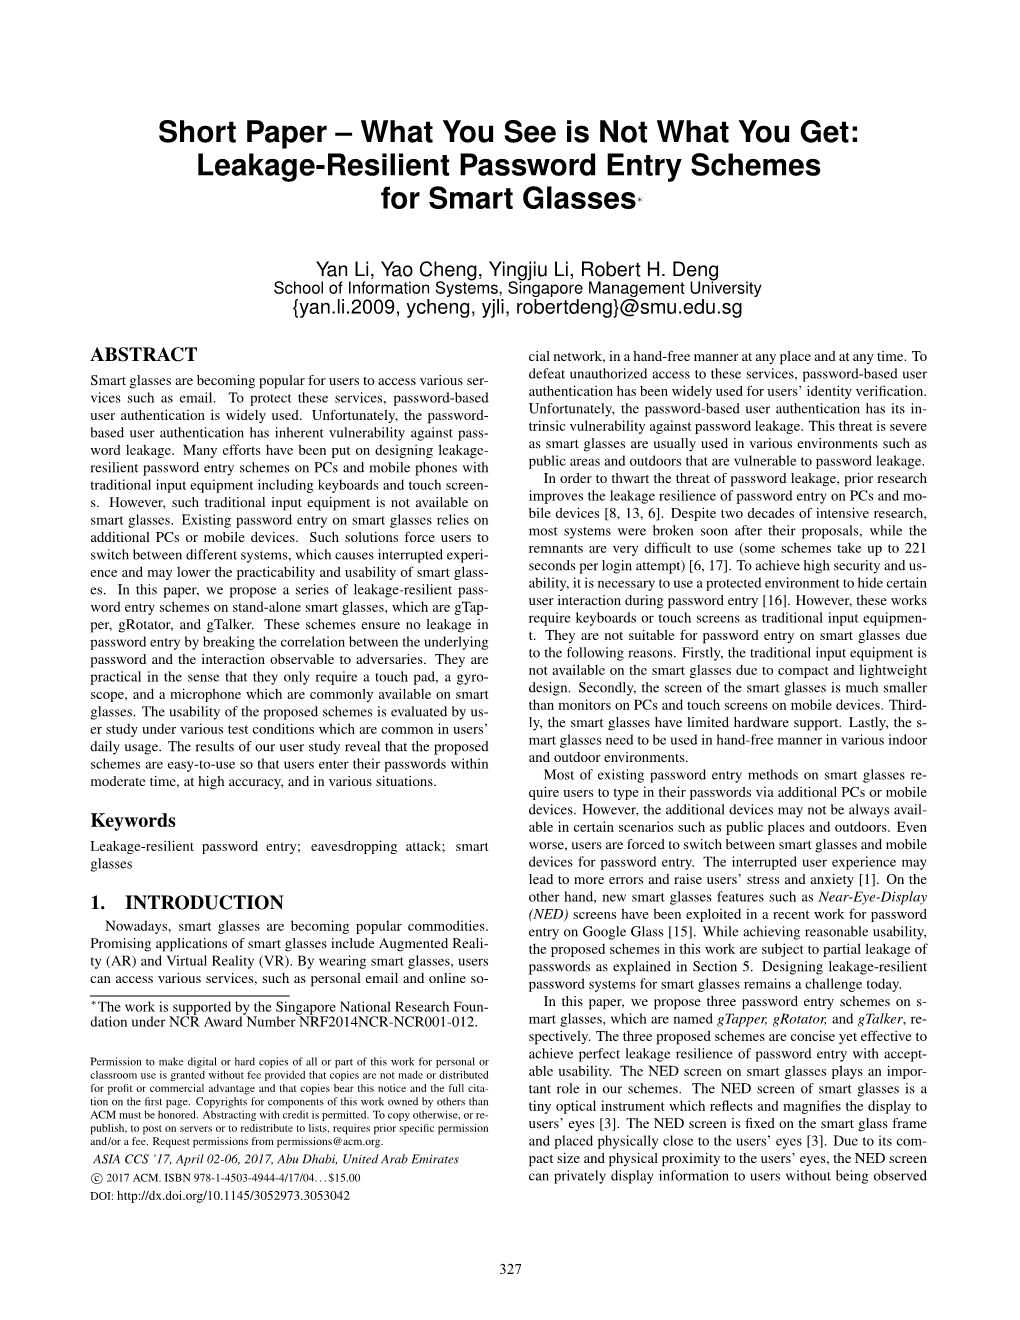 Short Paper – What You See Is Not What You Get: Leakage-Resilient Password Entry Schemes for Smart Glasses∗